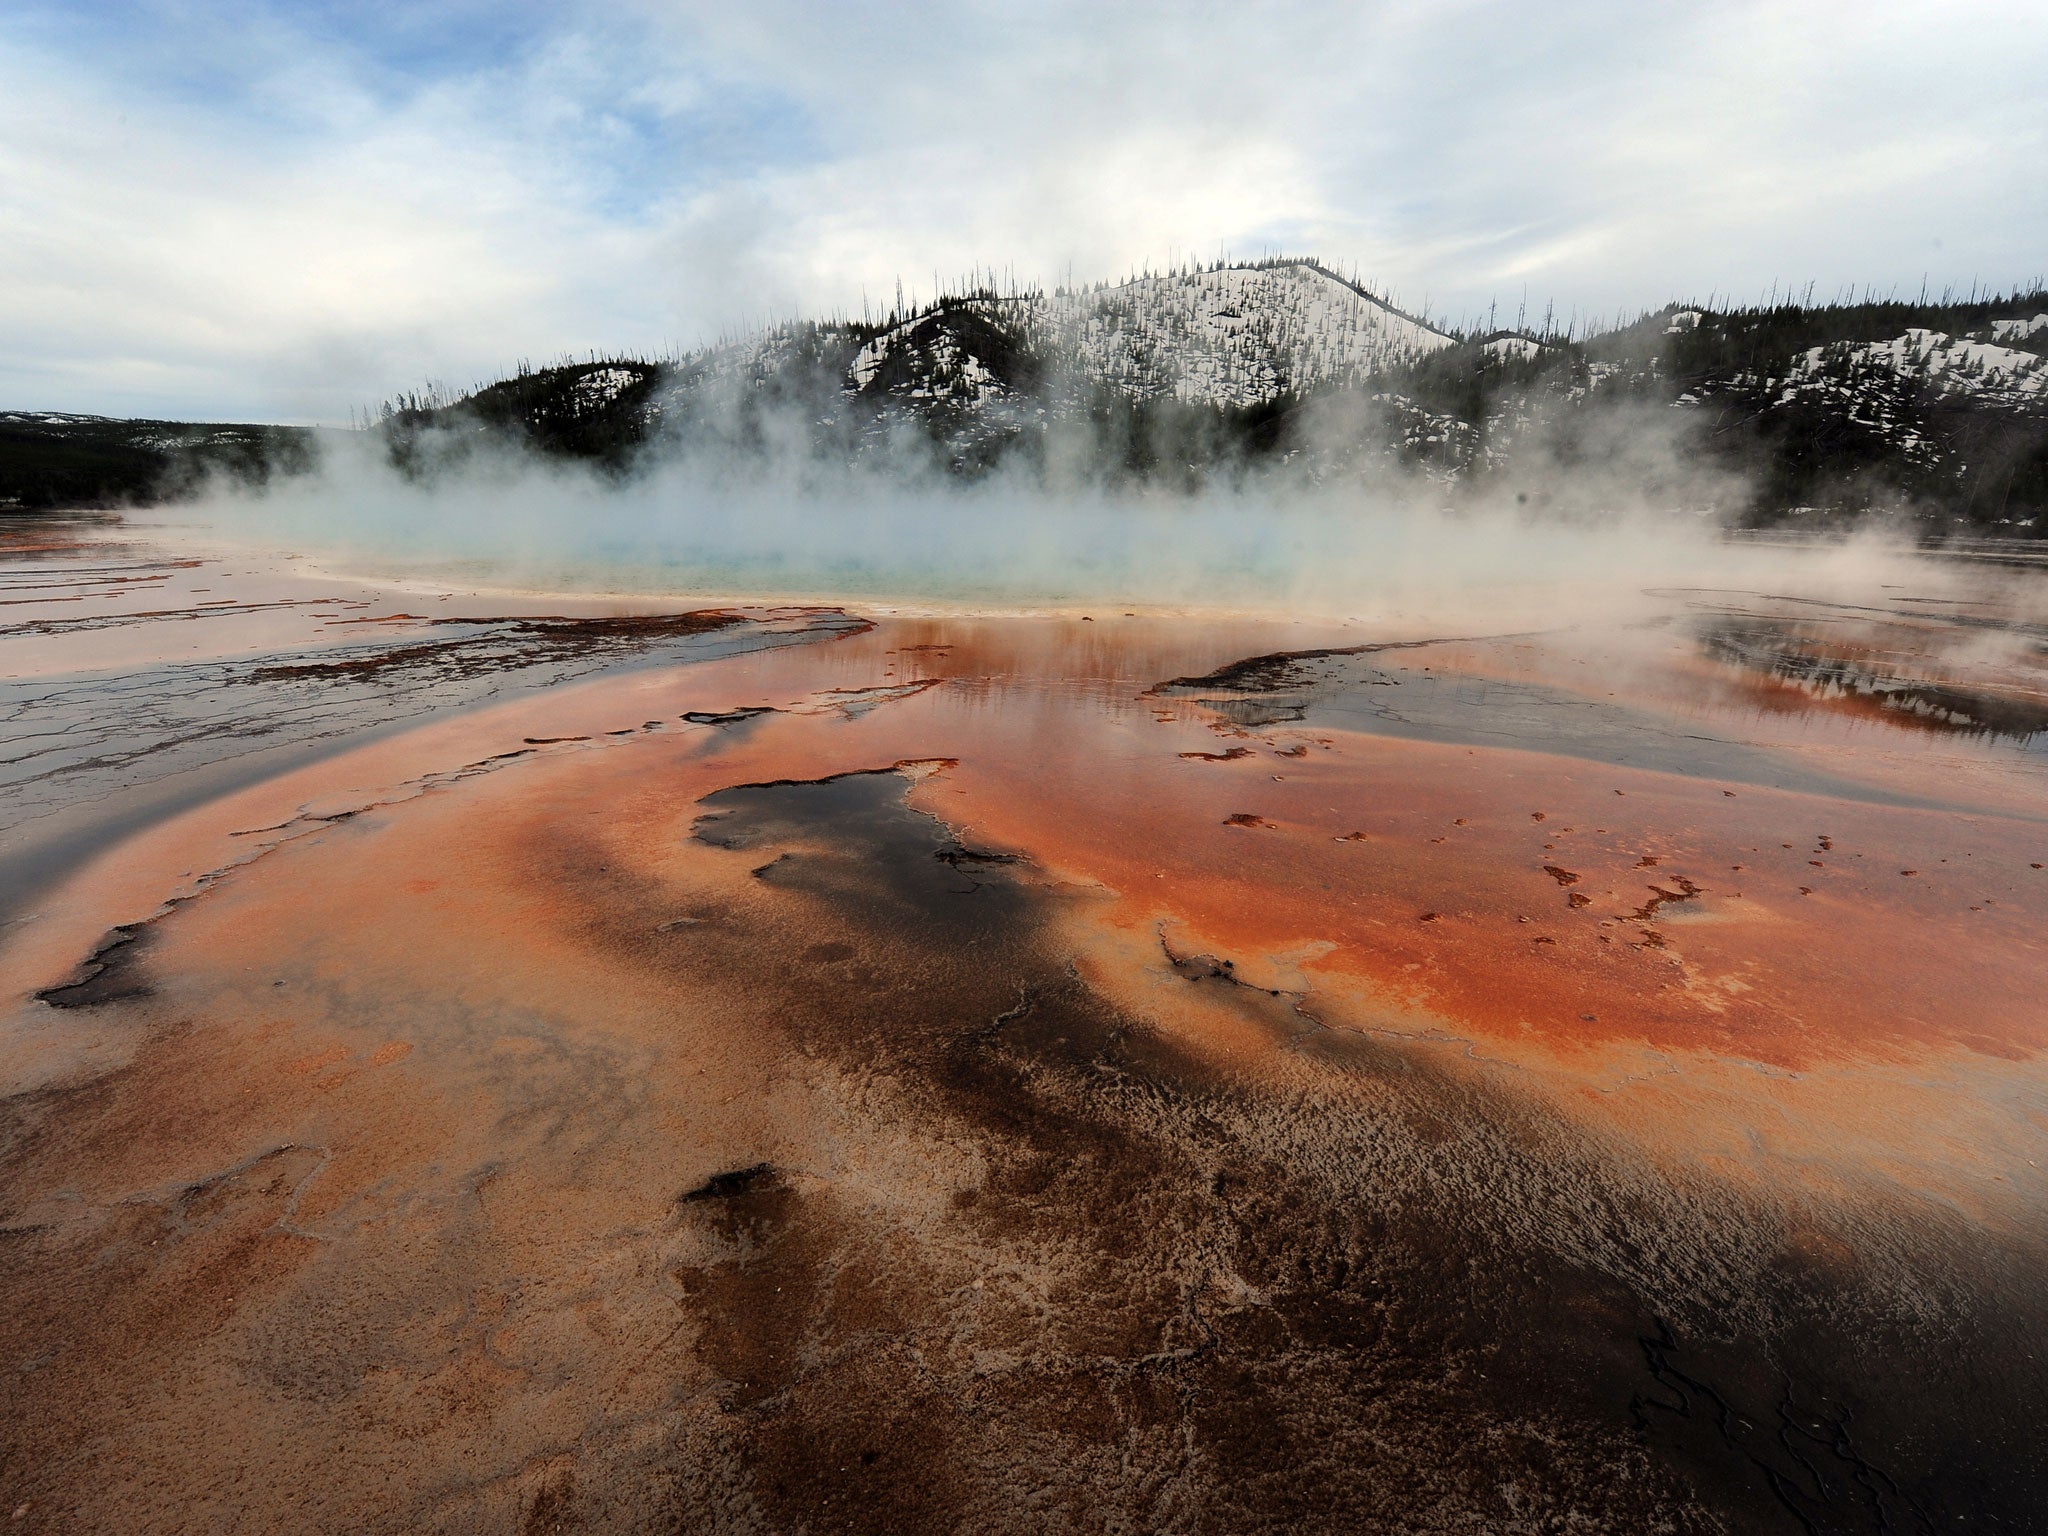 View of the 'Grand Prismatic' hot spring in the Yellowstone National Park, Wyoming on 1 June 2011